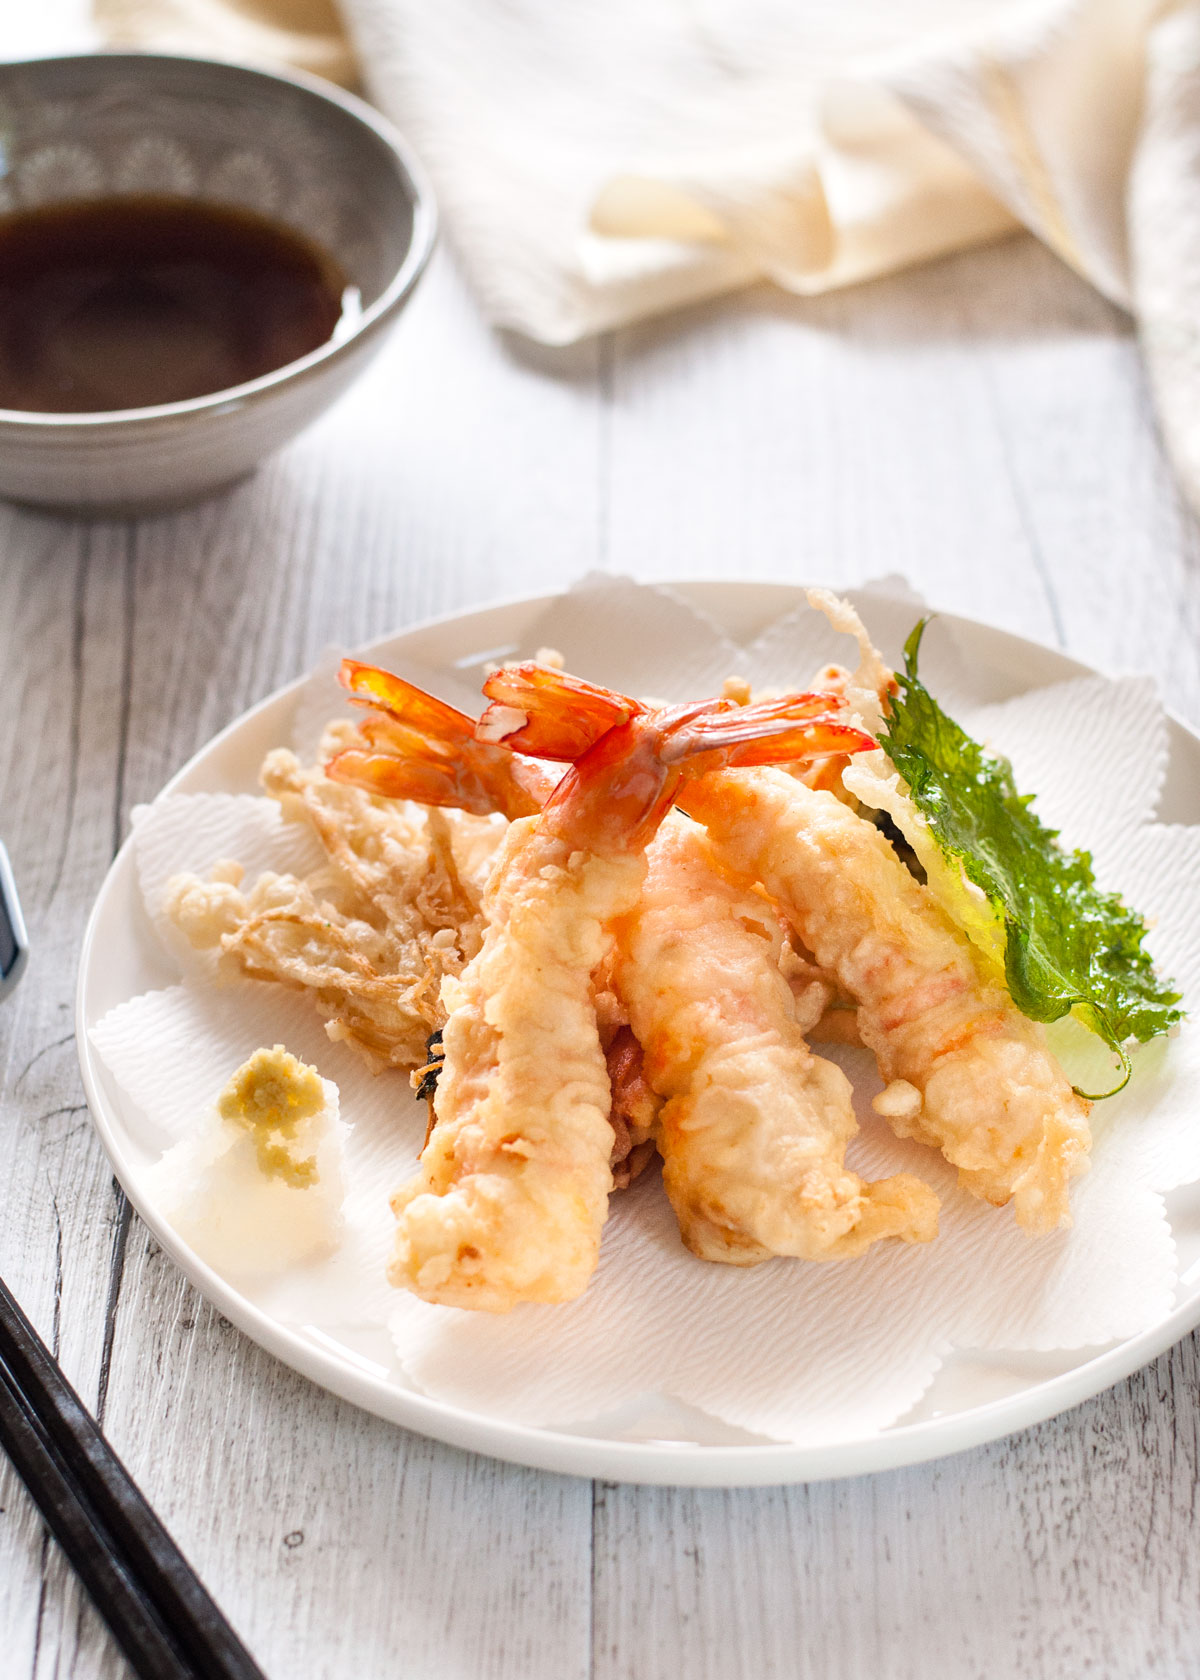 Learn how to make Tempura, one of the most iconic foods of Japan! japan.recipetineats.com